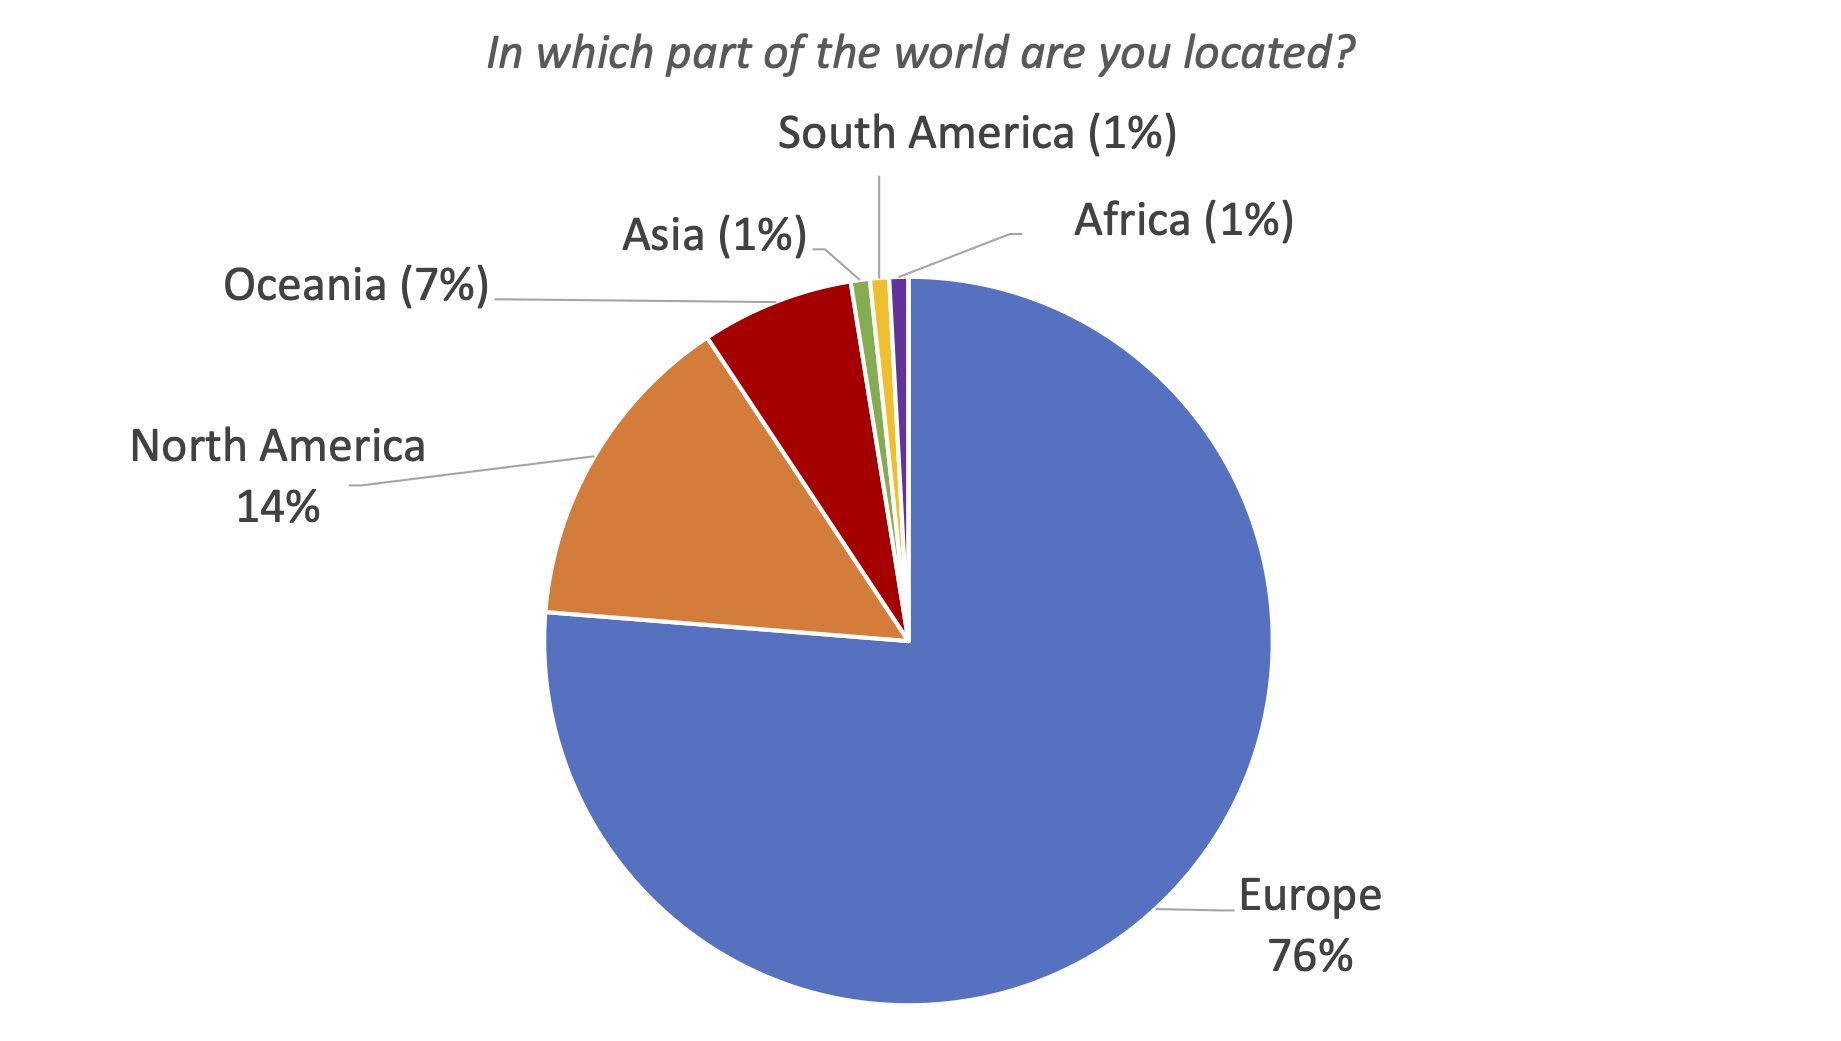 04. In which part of the world are you located?